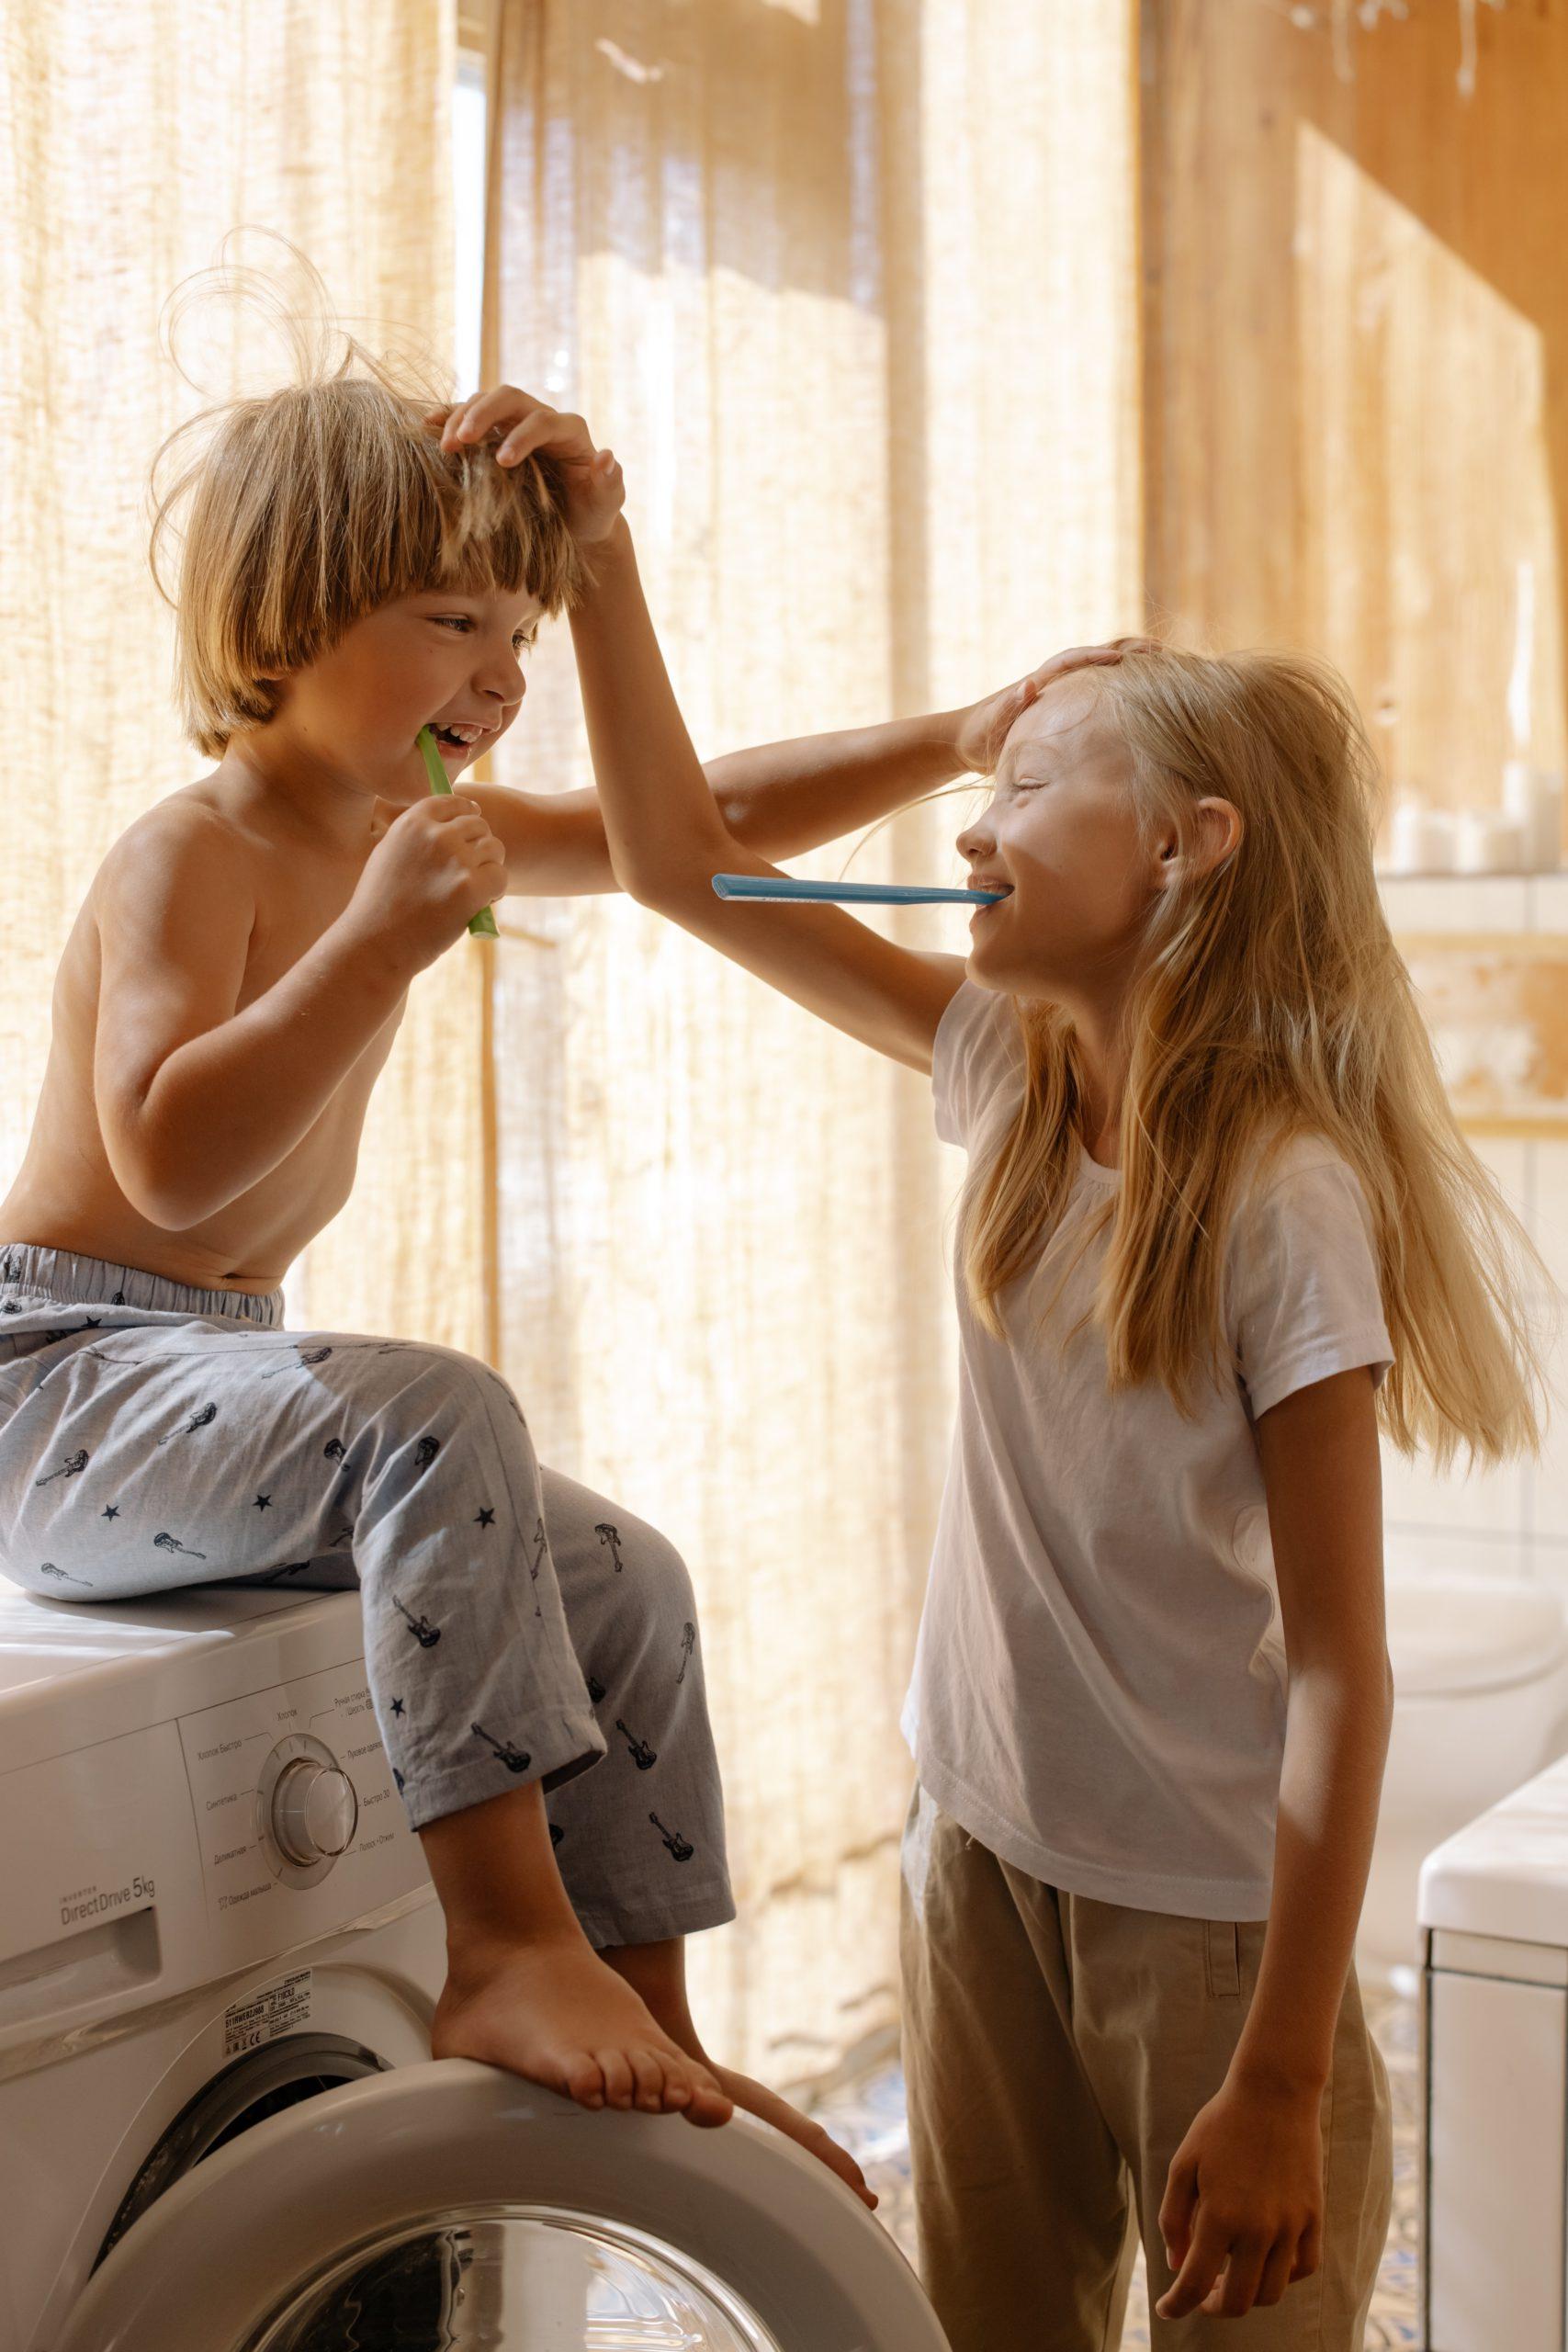 The Complete Guide to Body Care and Personal Hygiene for Kids